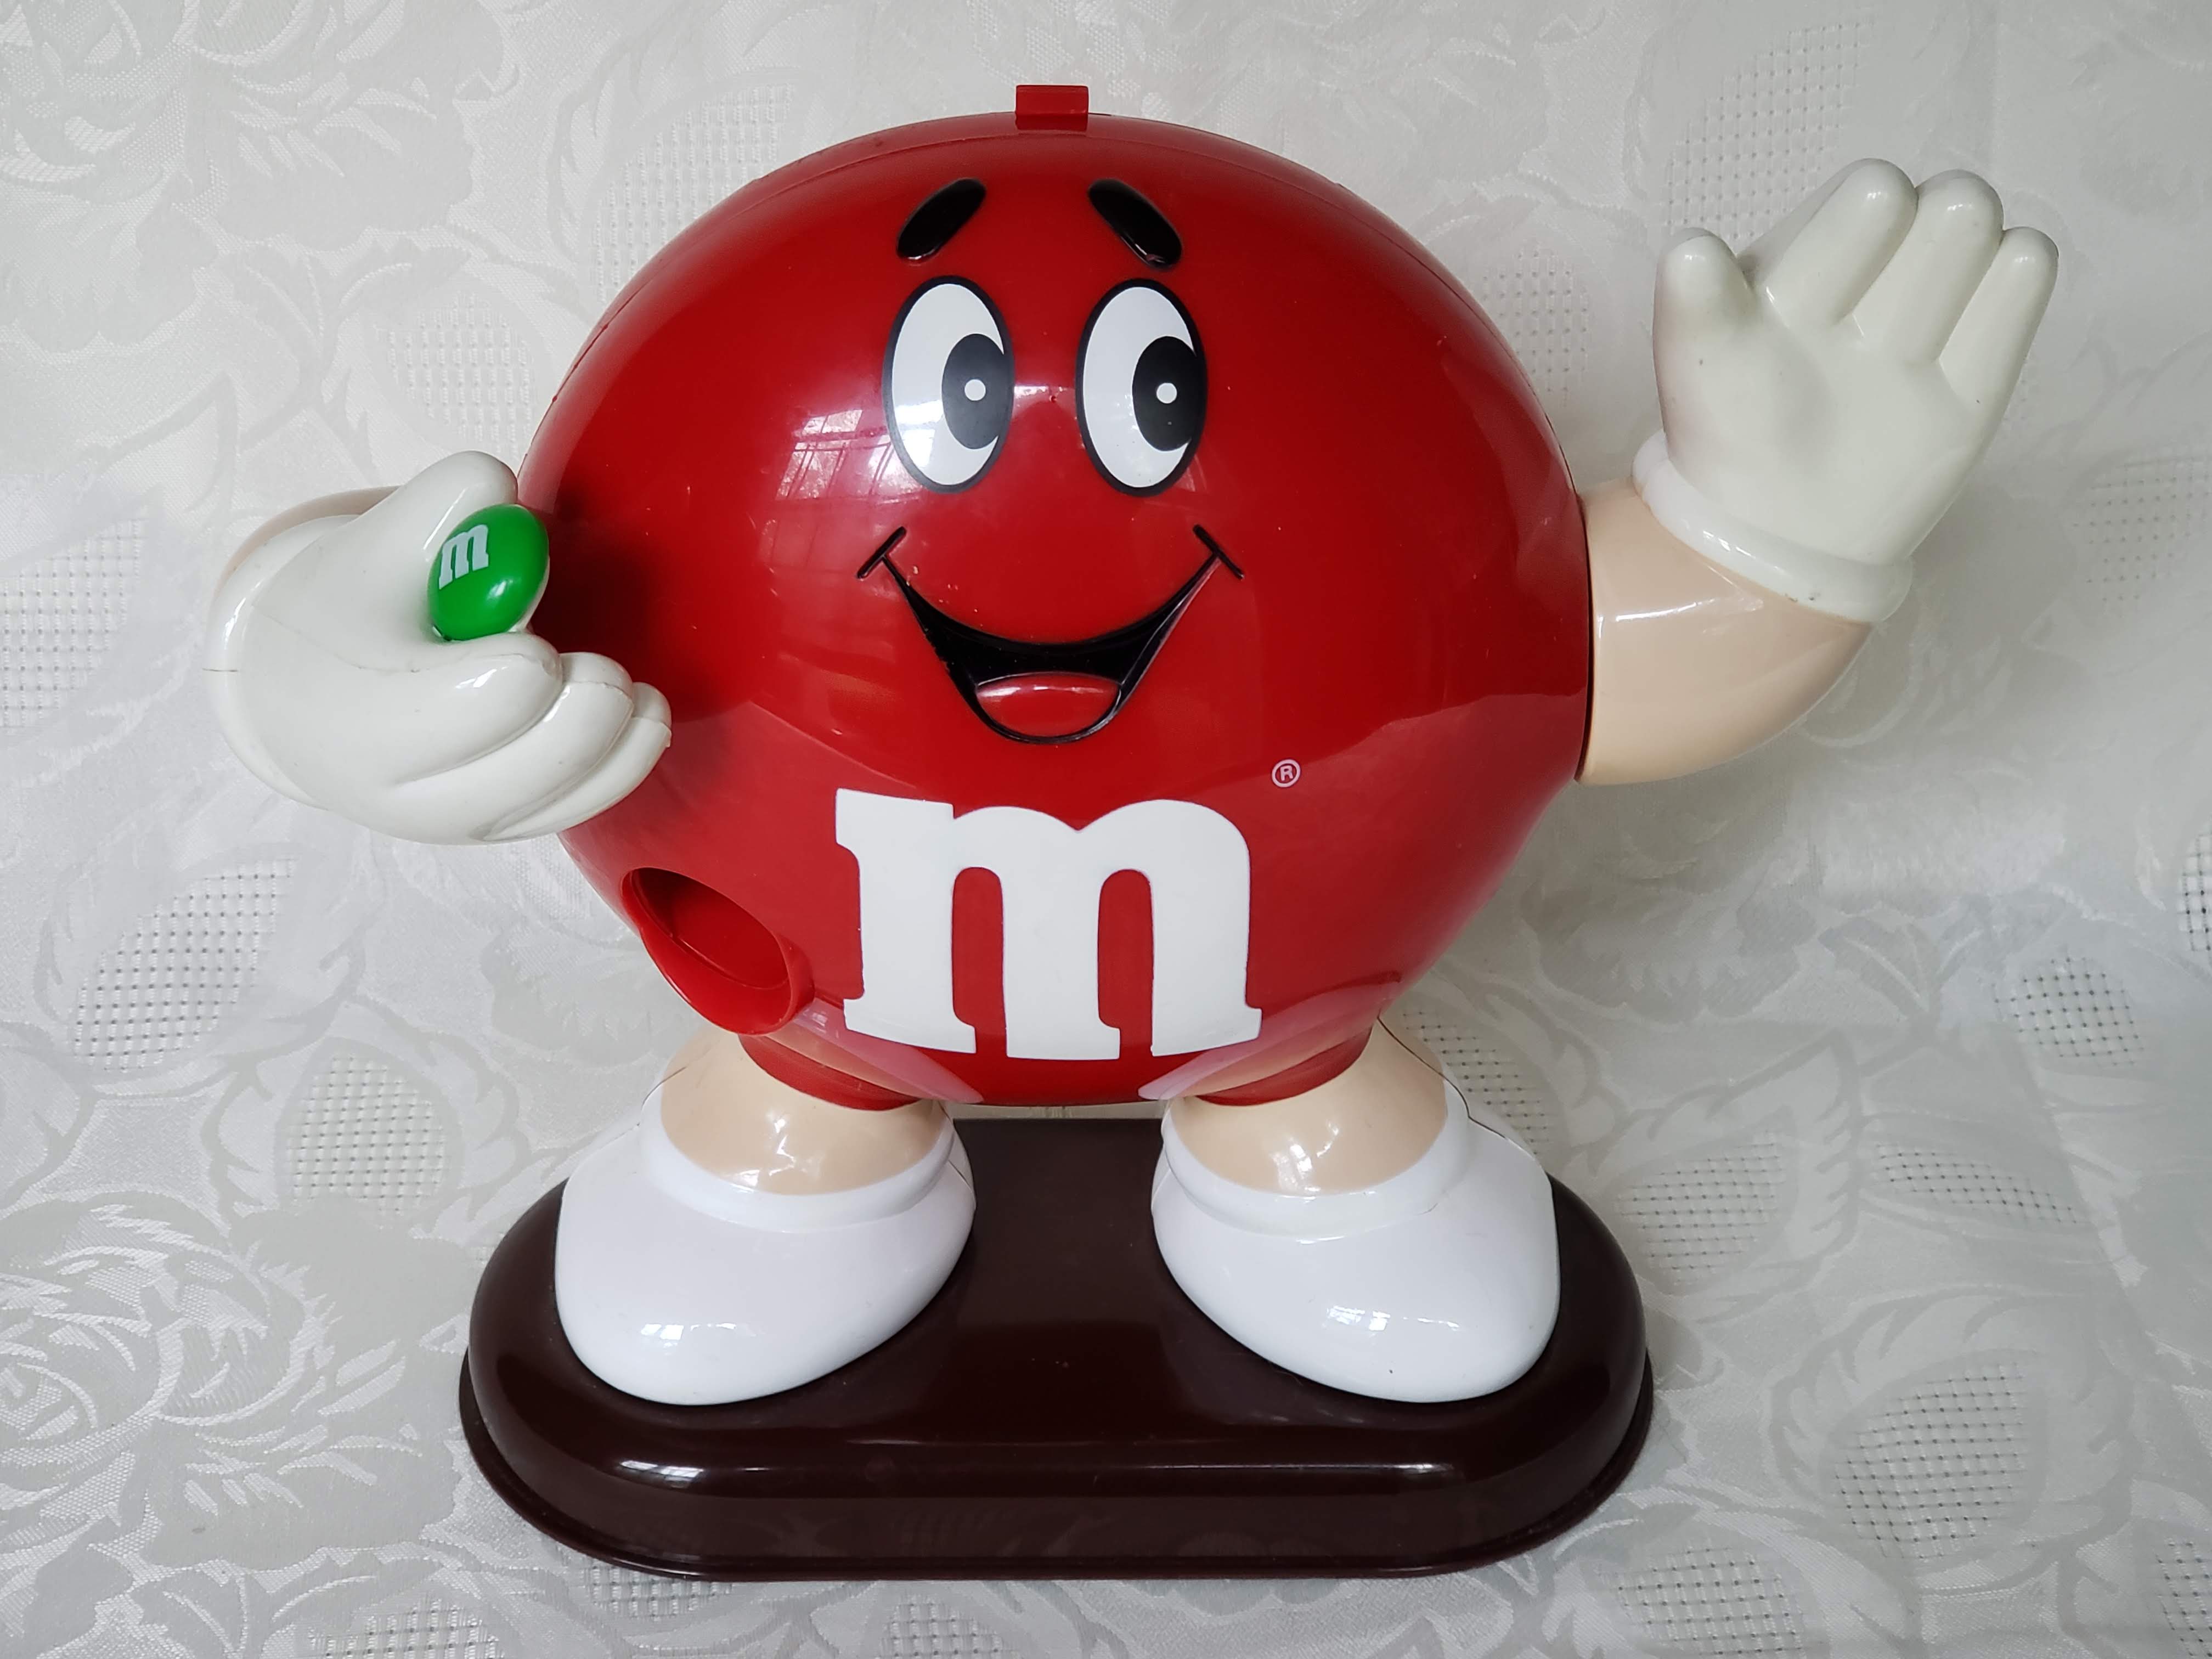 https://serstyle.com/wp-content/uploads/2018/09/Red-MM-Candy-Dispenser-with-Waving-Hand.jpg